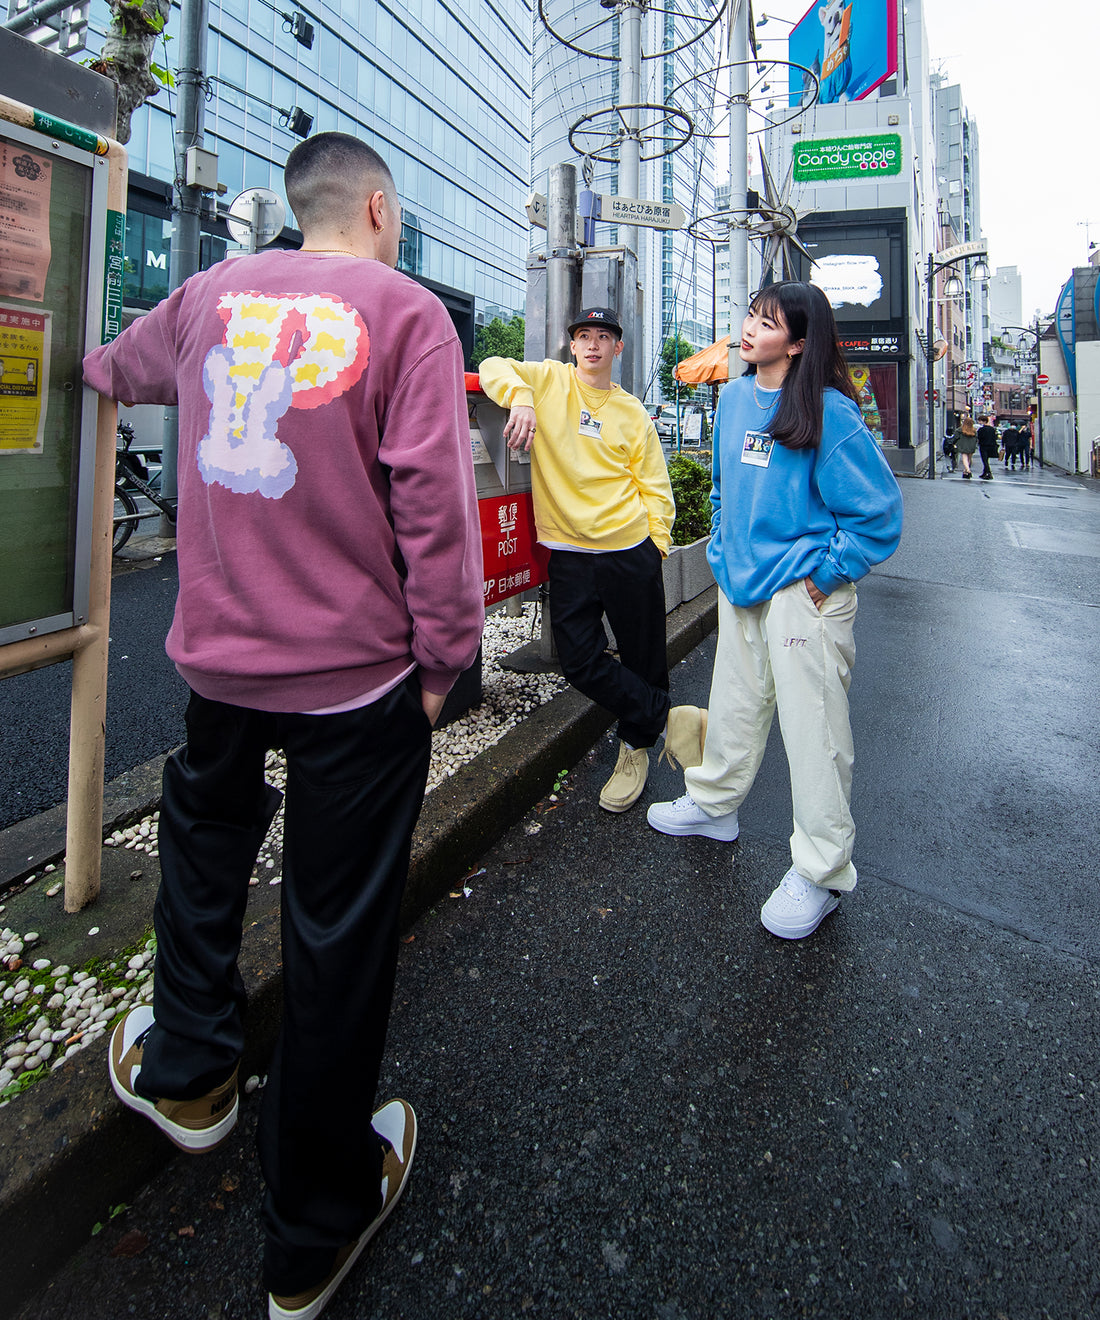 LFYT 2020 Autumn/Winter Final Delivery - LFYT x DEE Capsule Collection